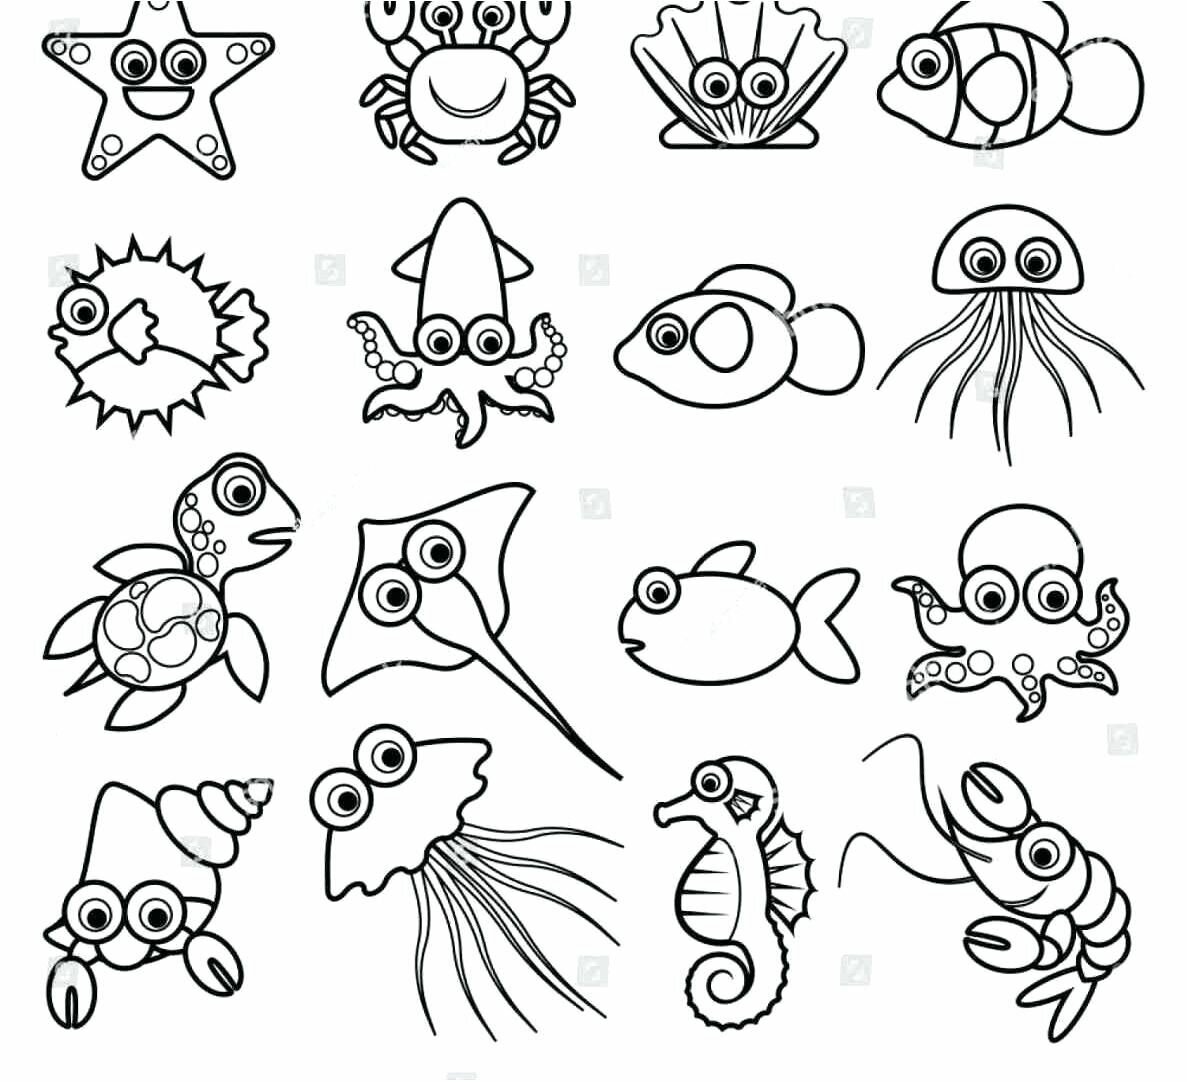 lovely Aquarium Drawing For Kids at Free for personal use awful display – aquarium coloring pages printable